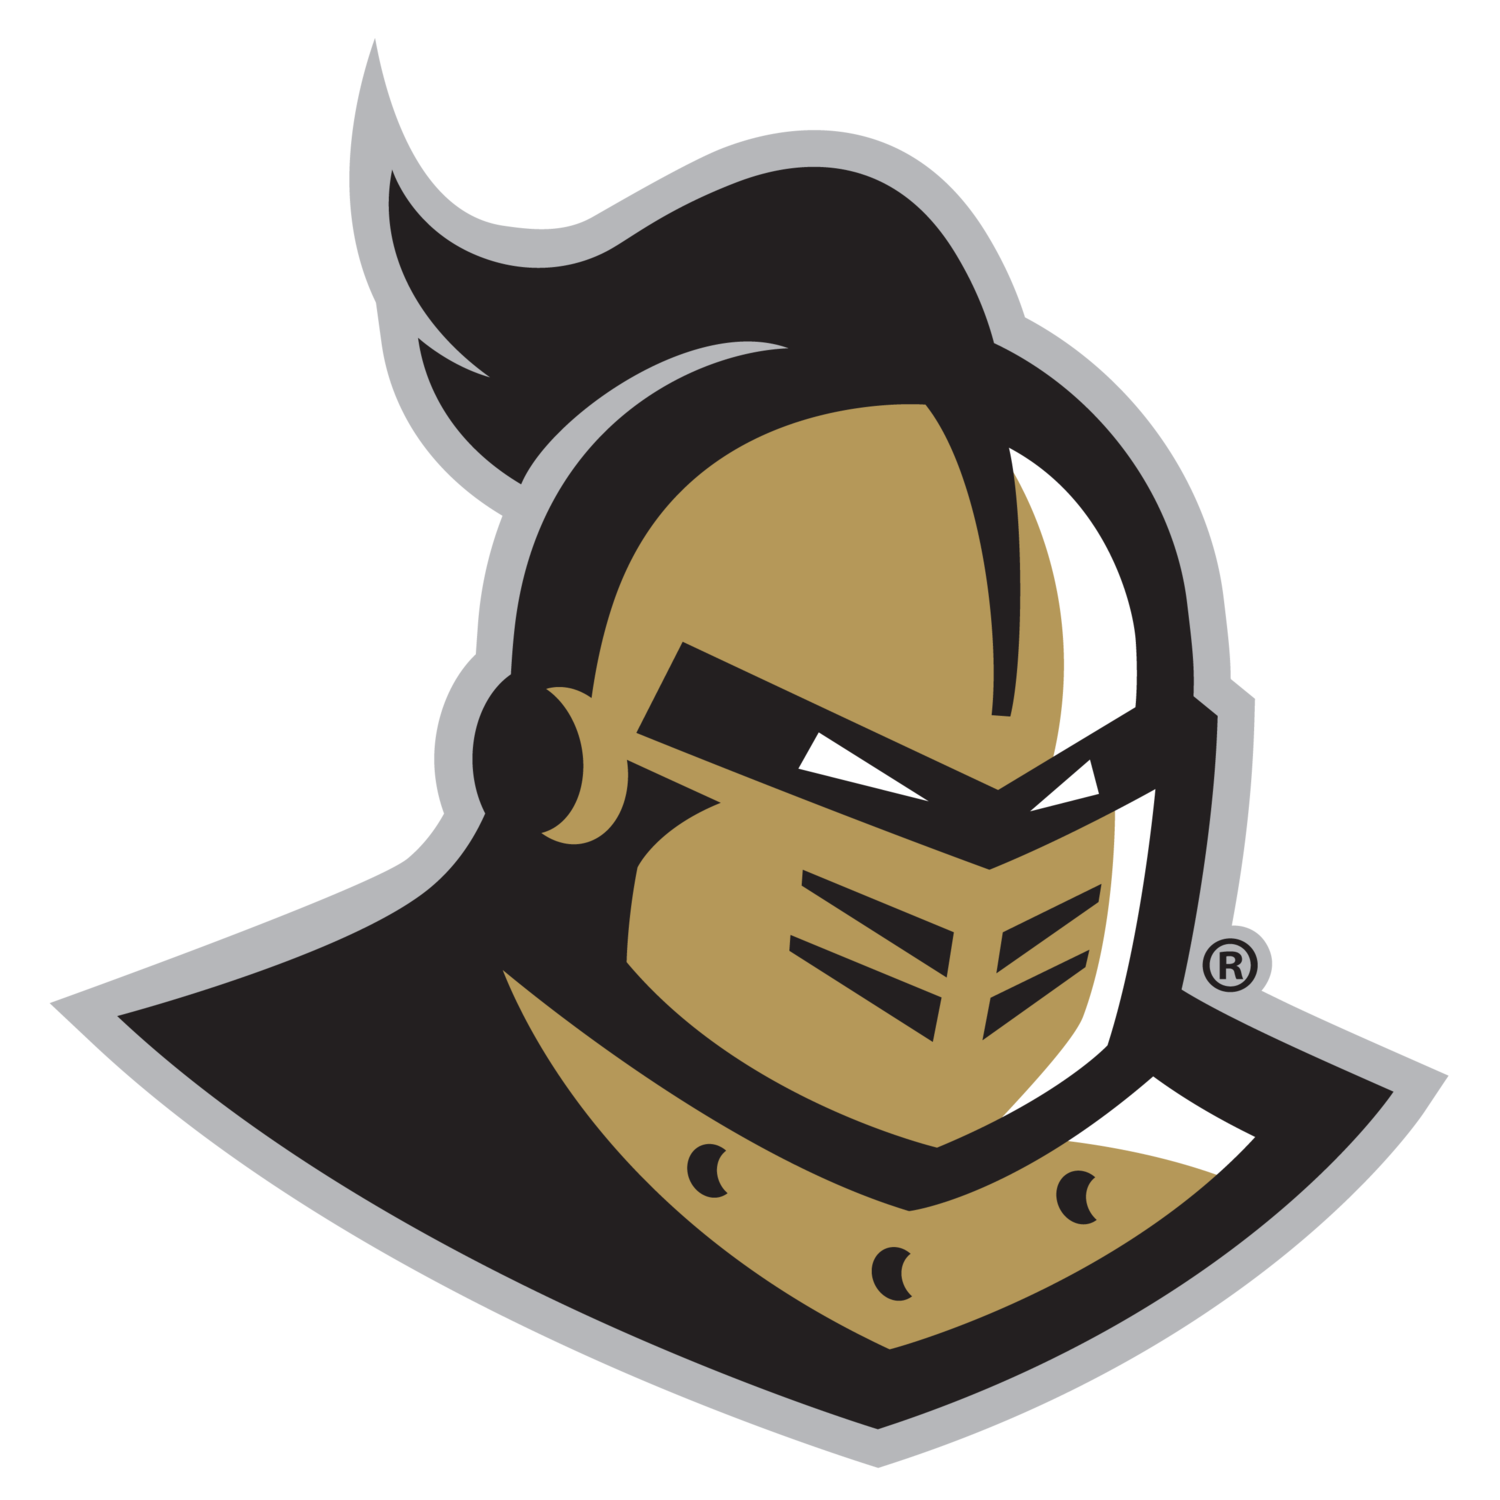 Knights Logo Png PNG Image Collection